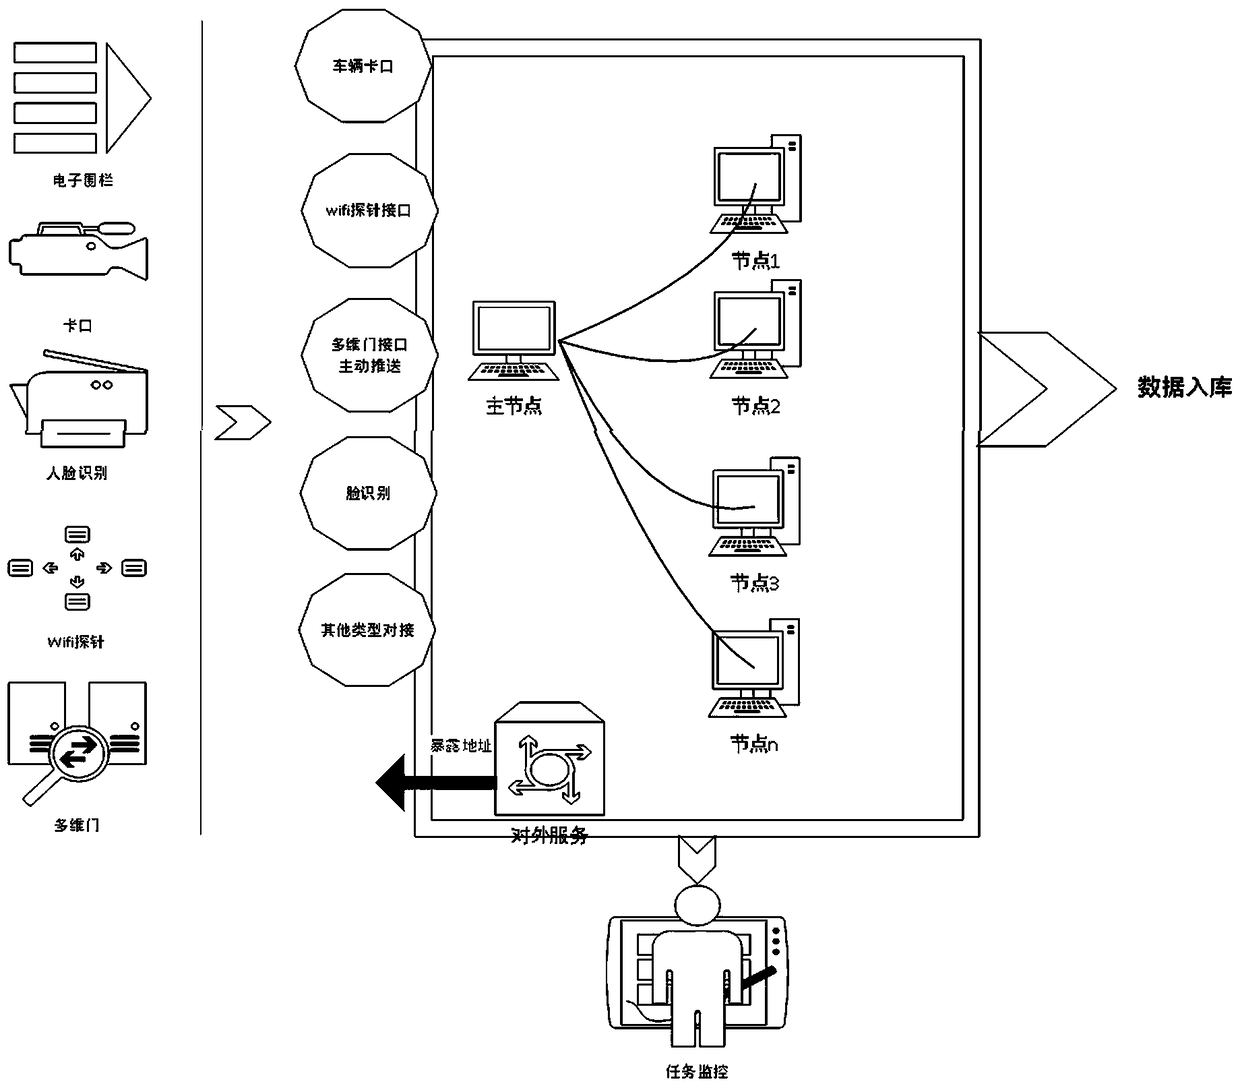 A method for multidimensional information perception processing